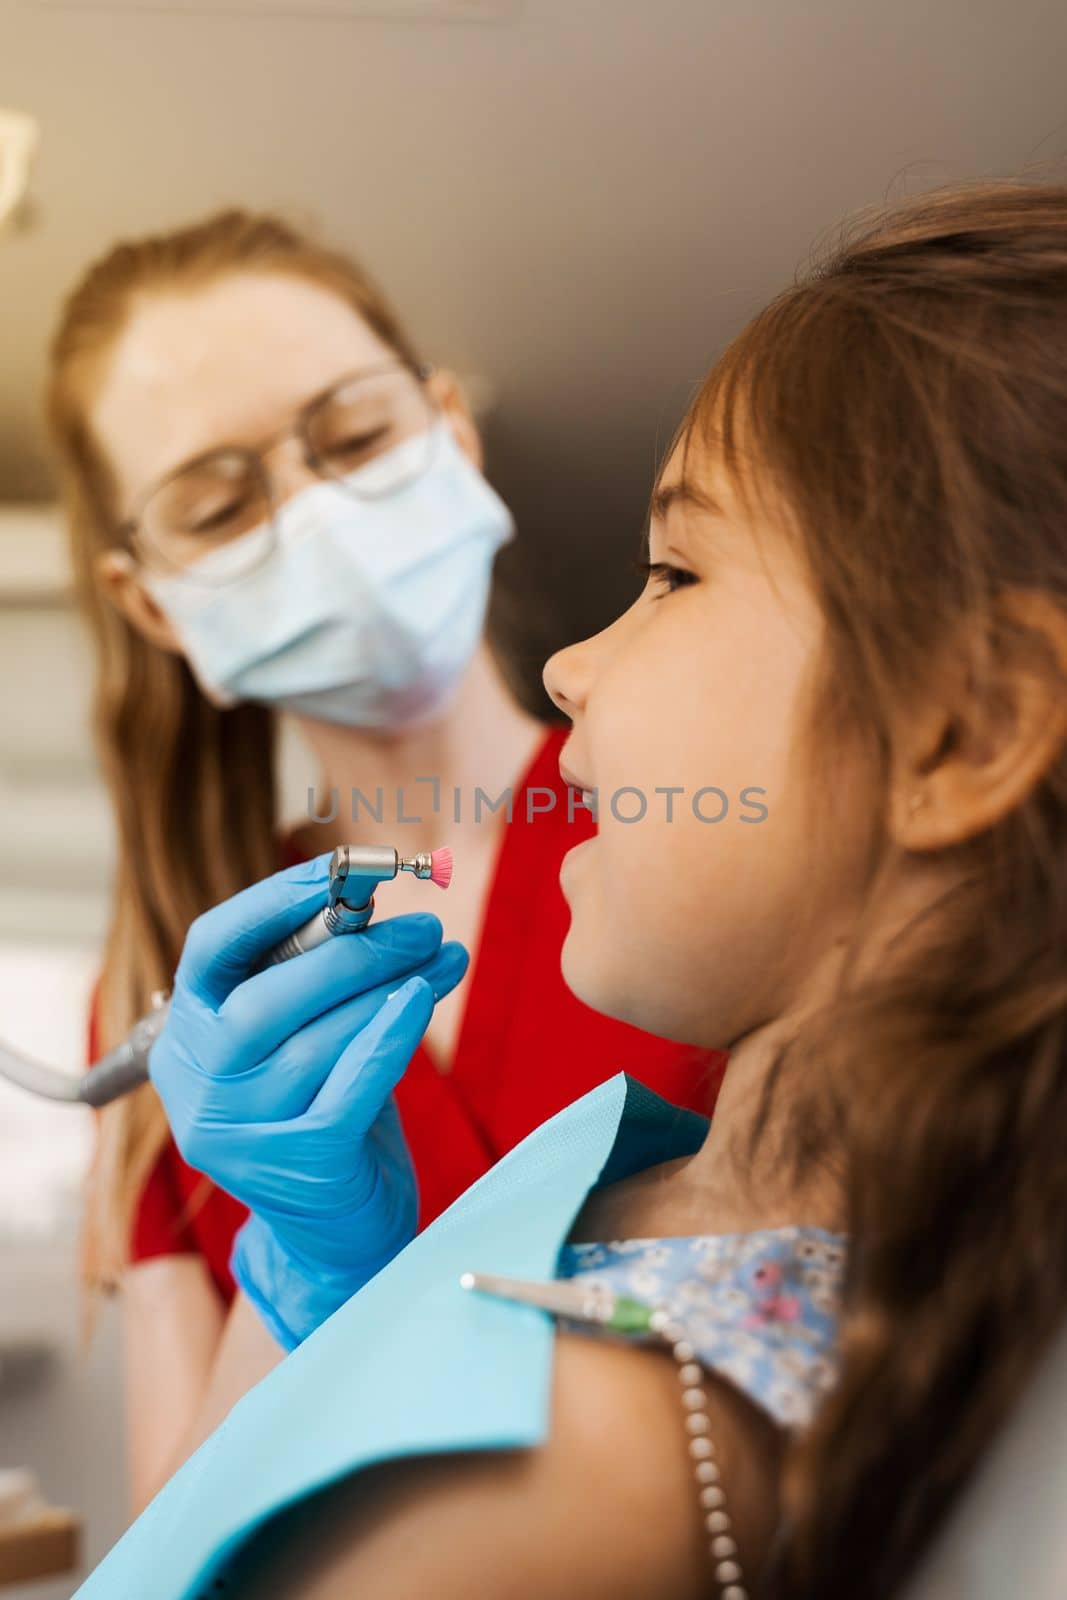 Professional teeth cleaning for child girl in dentistry. Professional hygiene for teeth of child. Pediatric dentist examines and consults kid patient in dentistry. by Rabizo